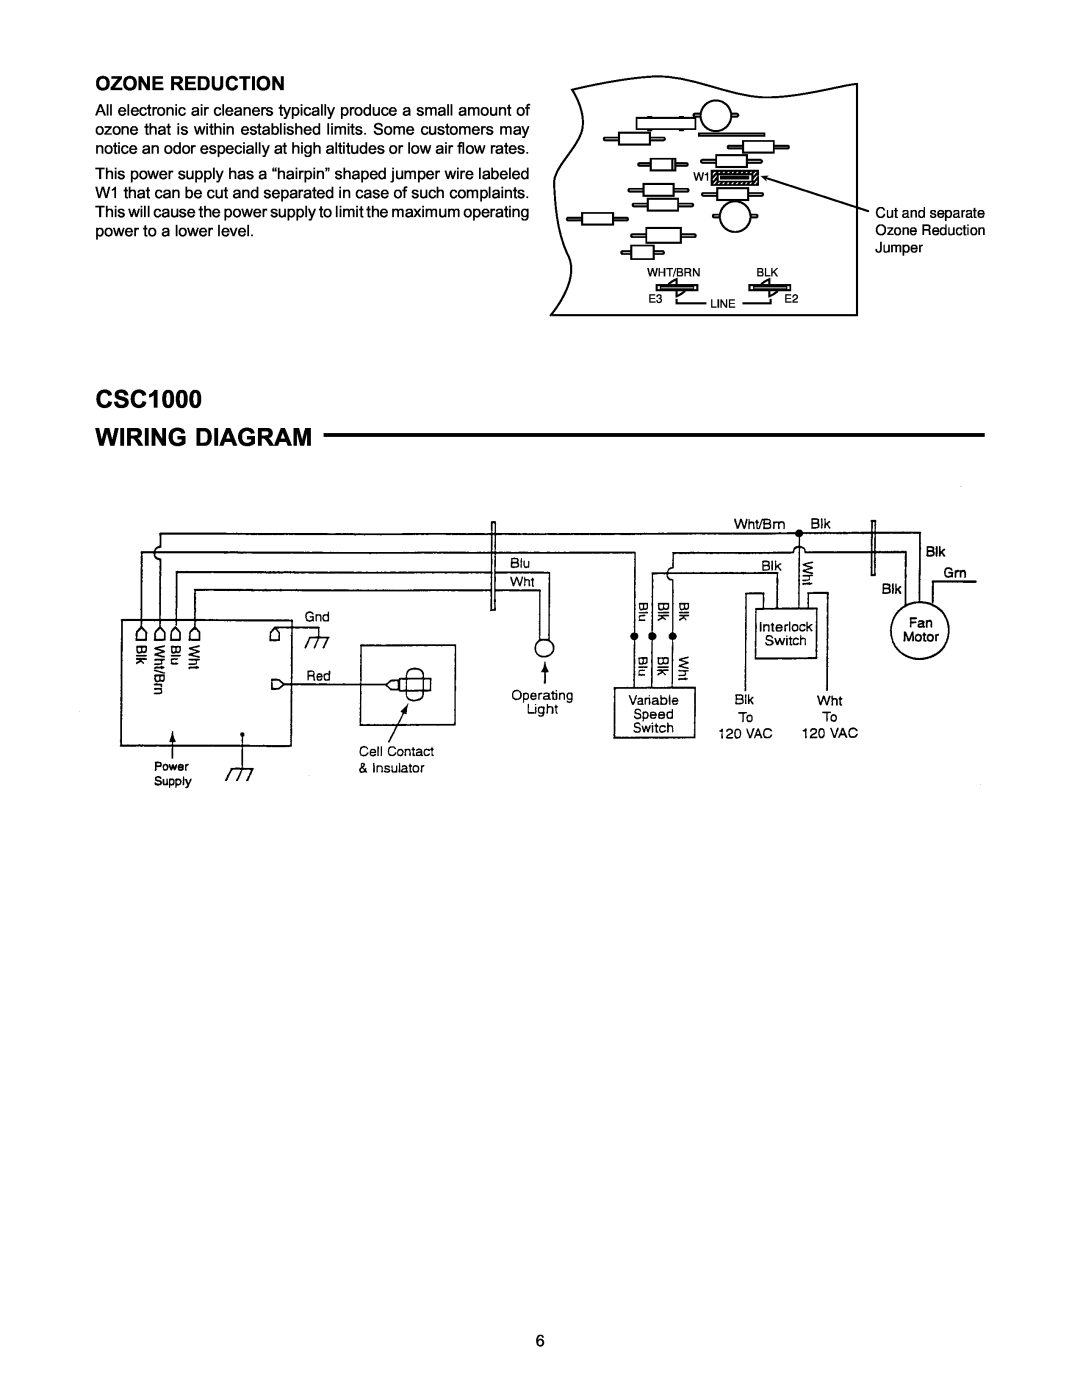 White Rodgers owner manual CSC1000 WIRING DIAGRAM, Ozone Reduction 